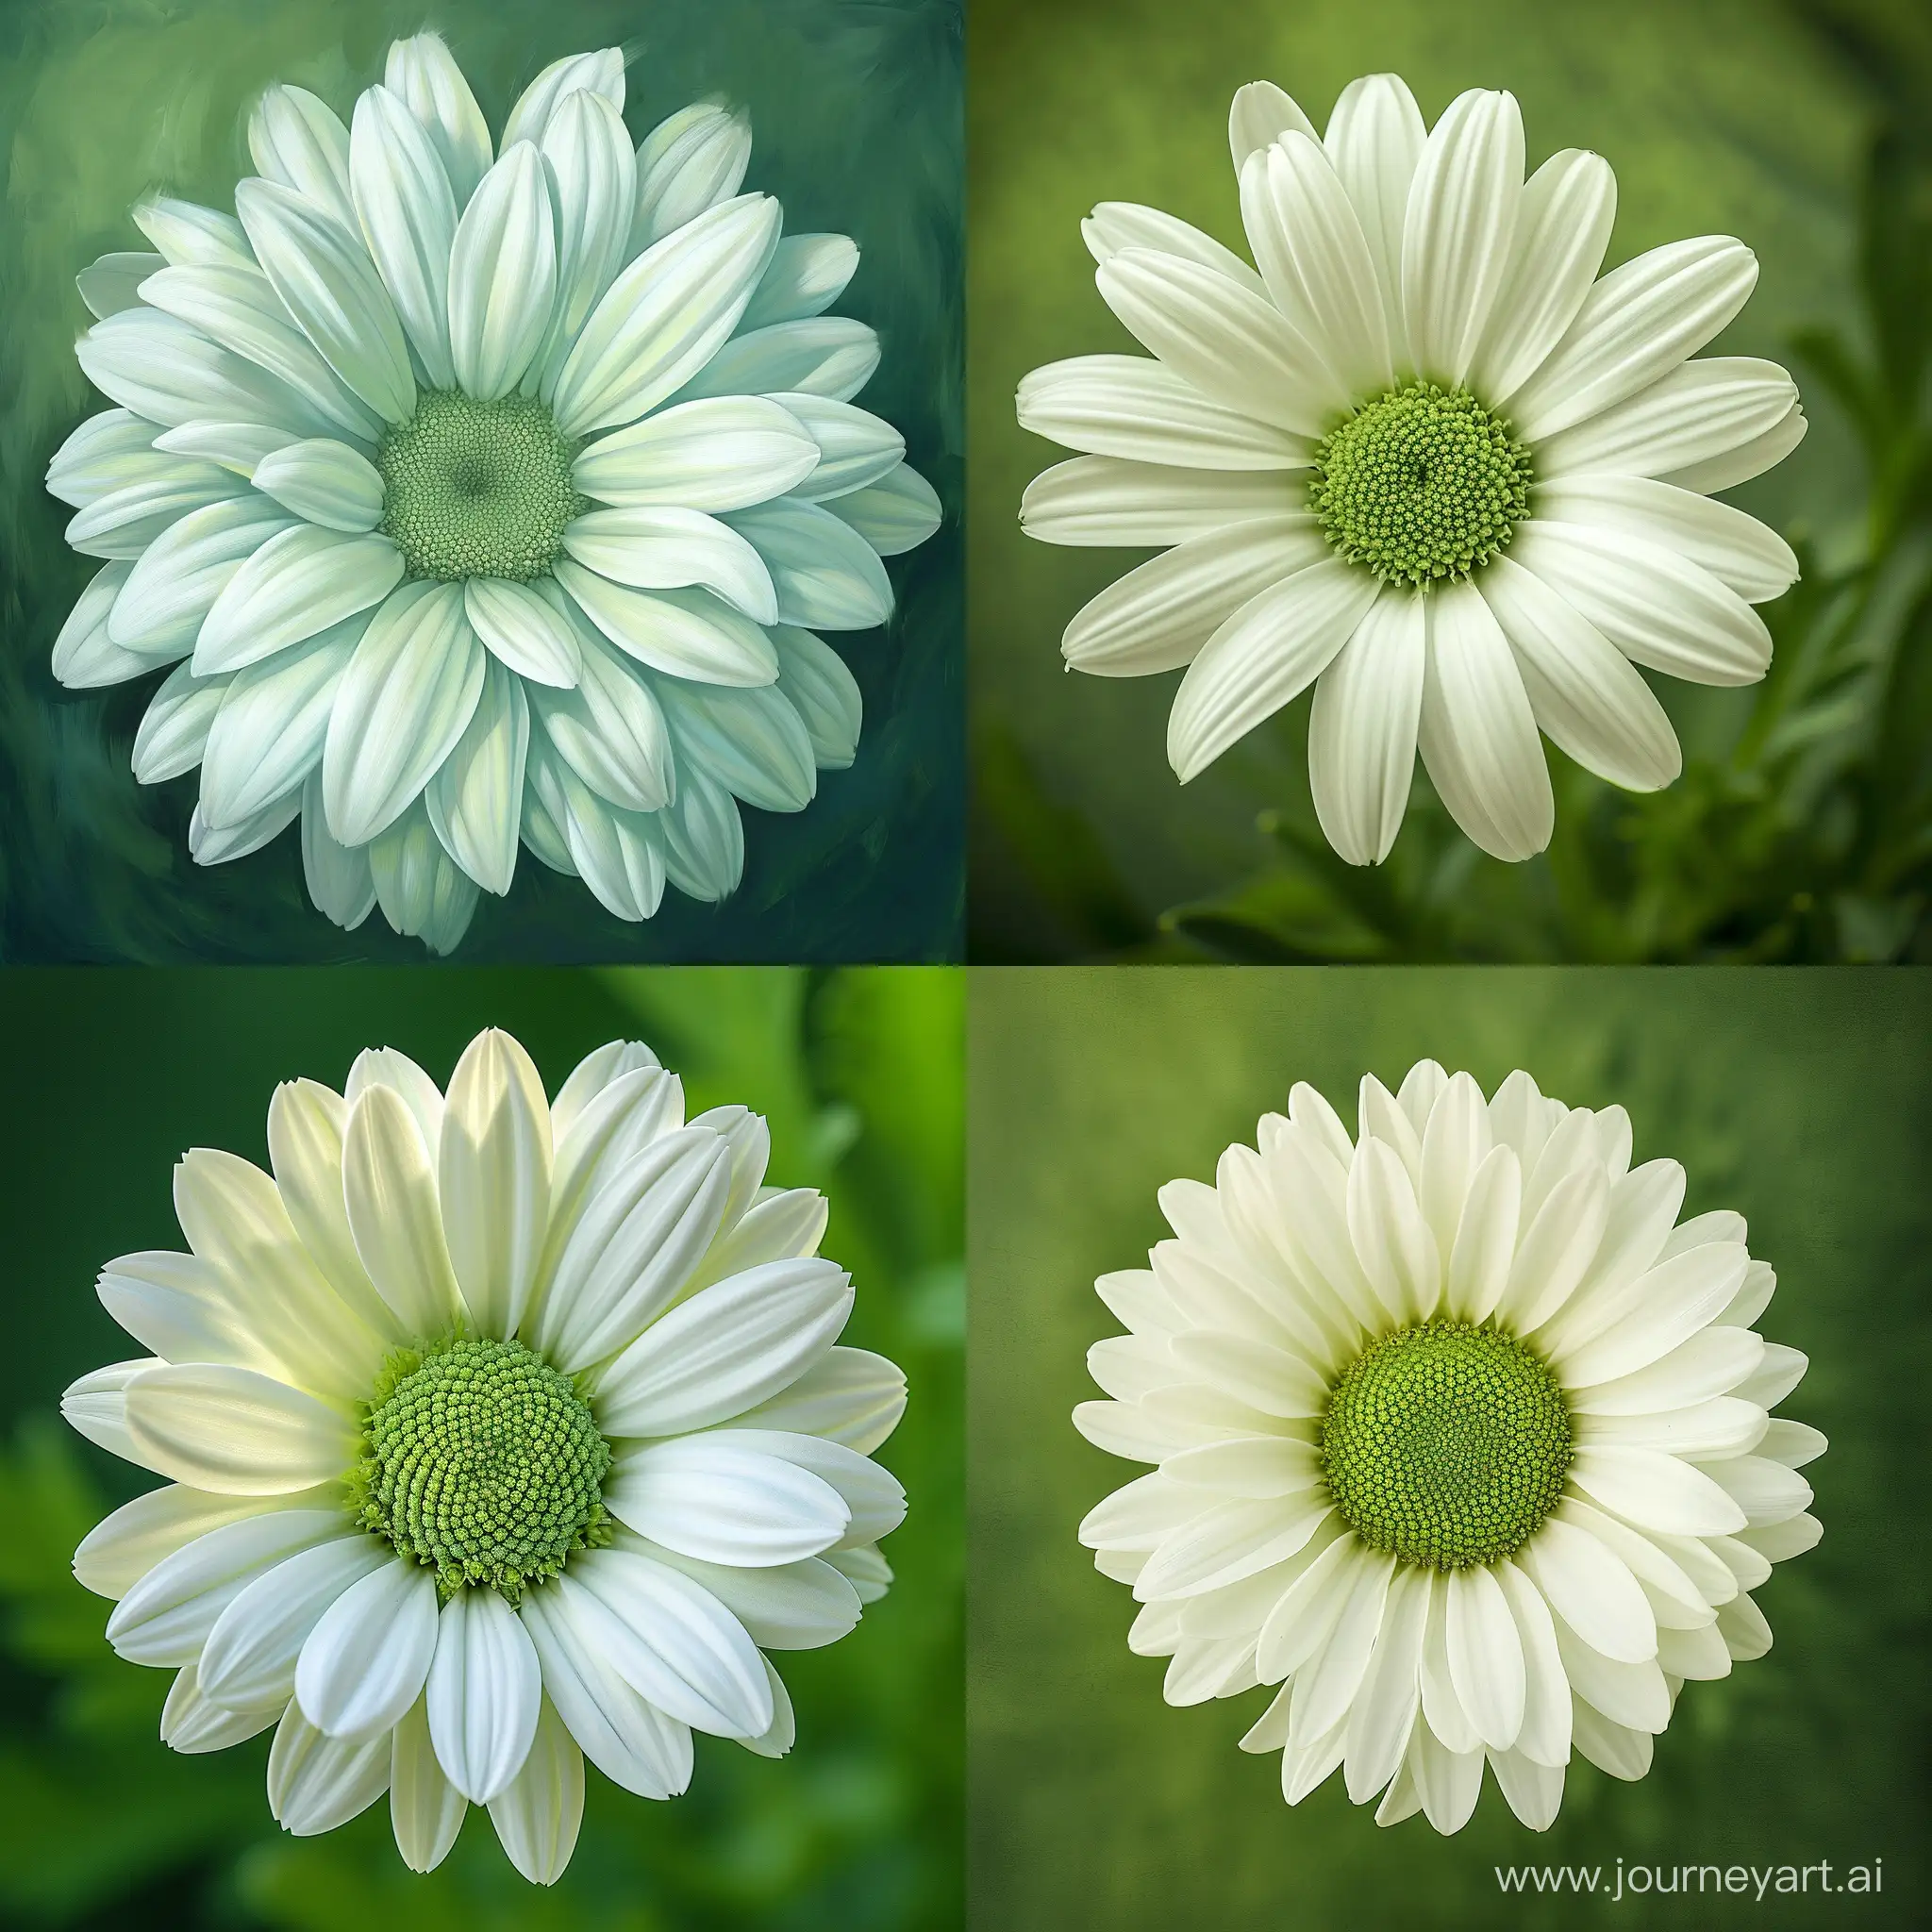 A vibrant daisy with pristine white petals and a soft, pale green center, set against a lush green backdrop.